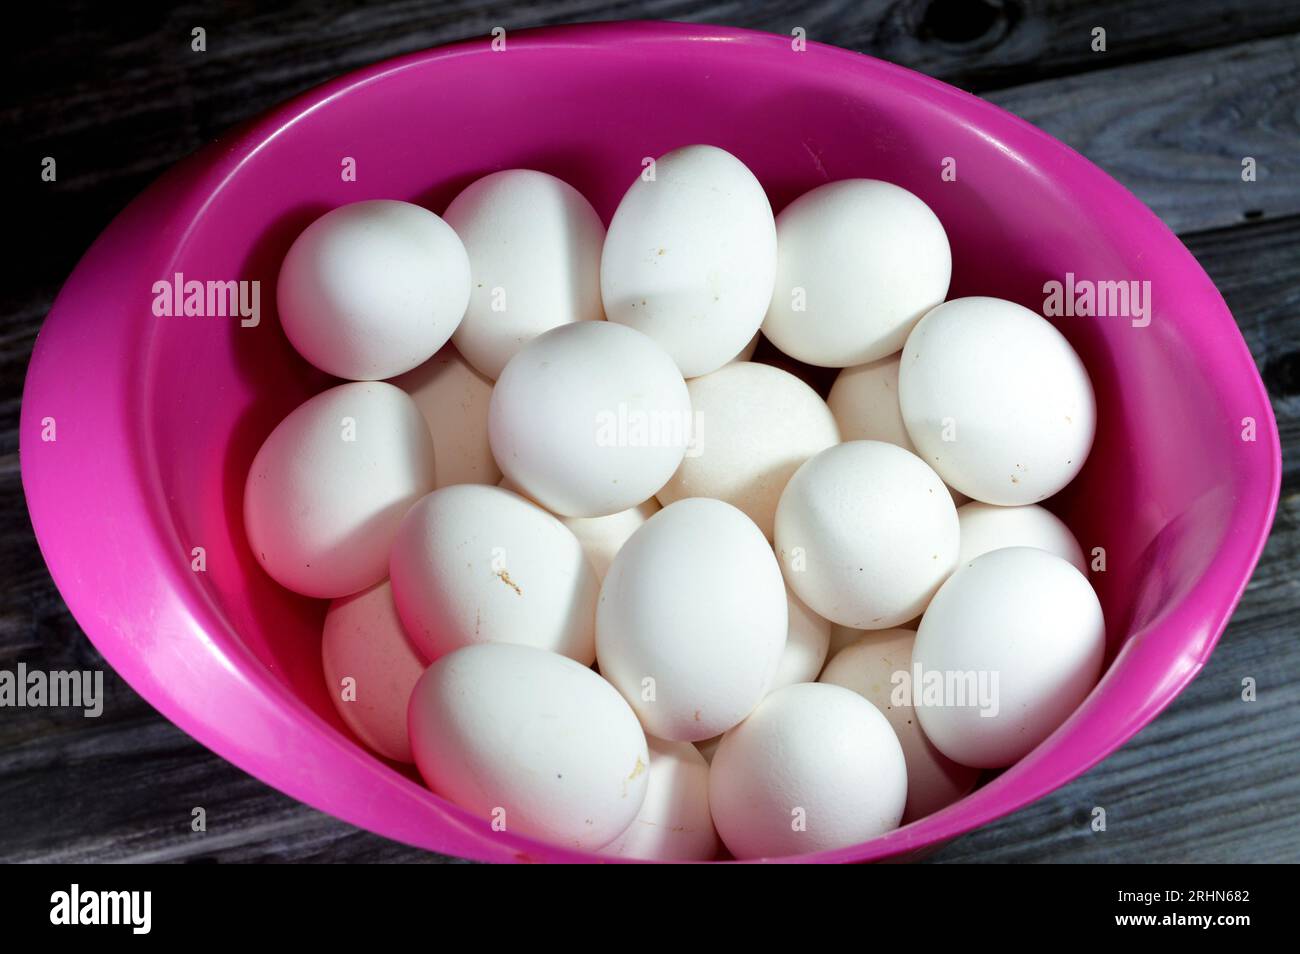 Pile of organic fresh and raw hen chicken white eggs, stack of eggs isolated and ready to be cooked in various cuisines, selective focus of eggs which Stock Photo